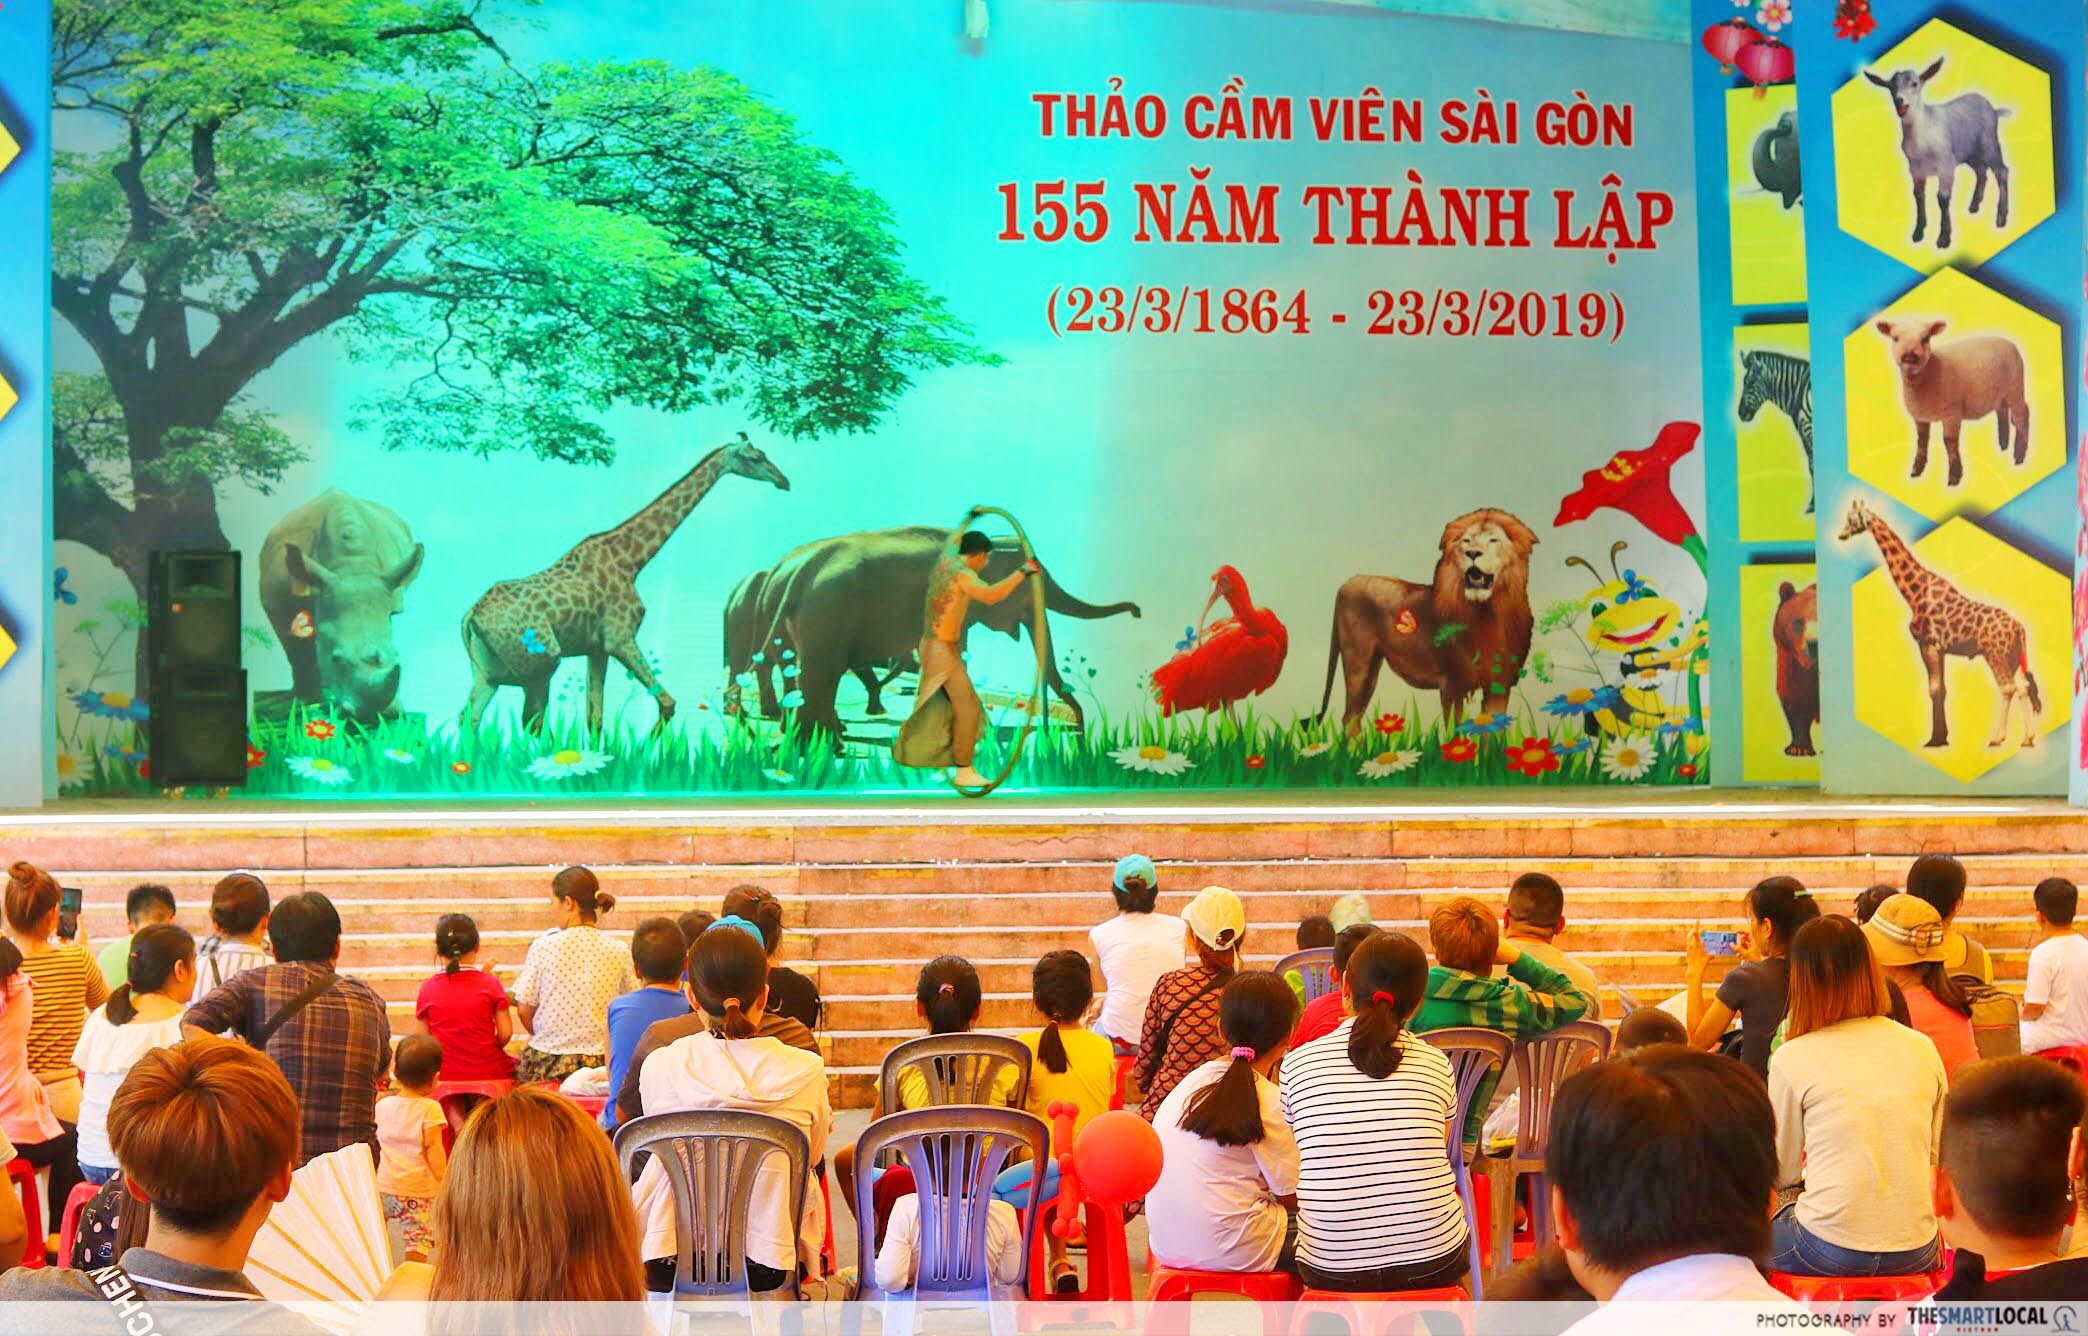 Saigon Zoo Guide: Things To Do From Animal-Spotting To Tram Rides